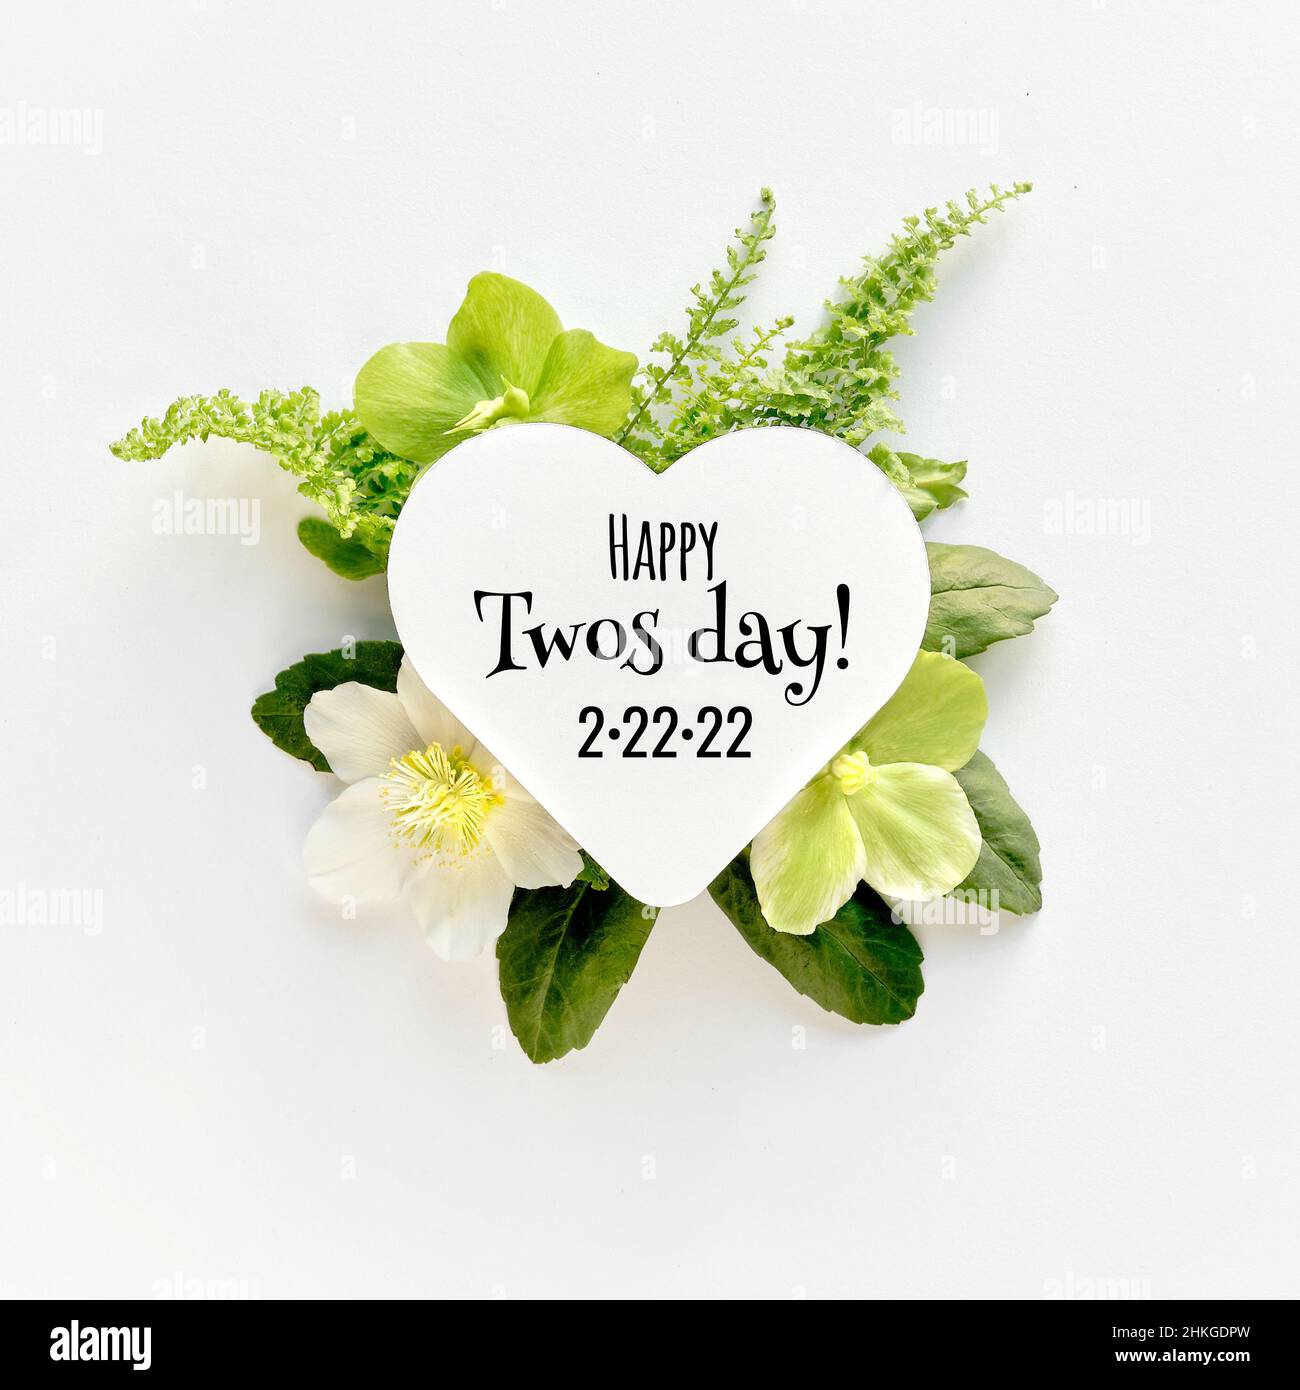 Happy Twos day 2.22.22 or Twosday. Winter flower arrangement. White paper heart with greeting text. Stock Photo